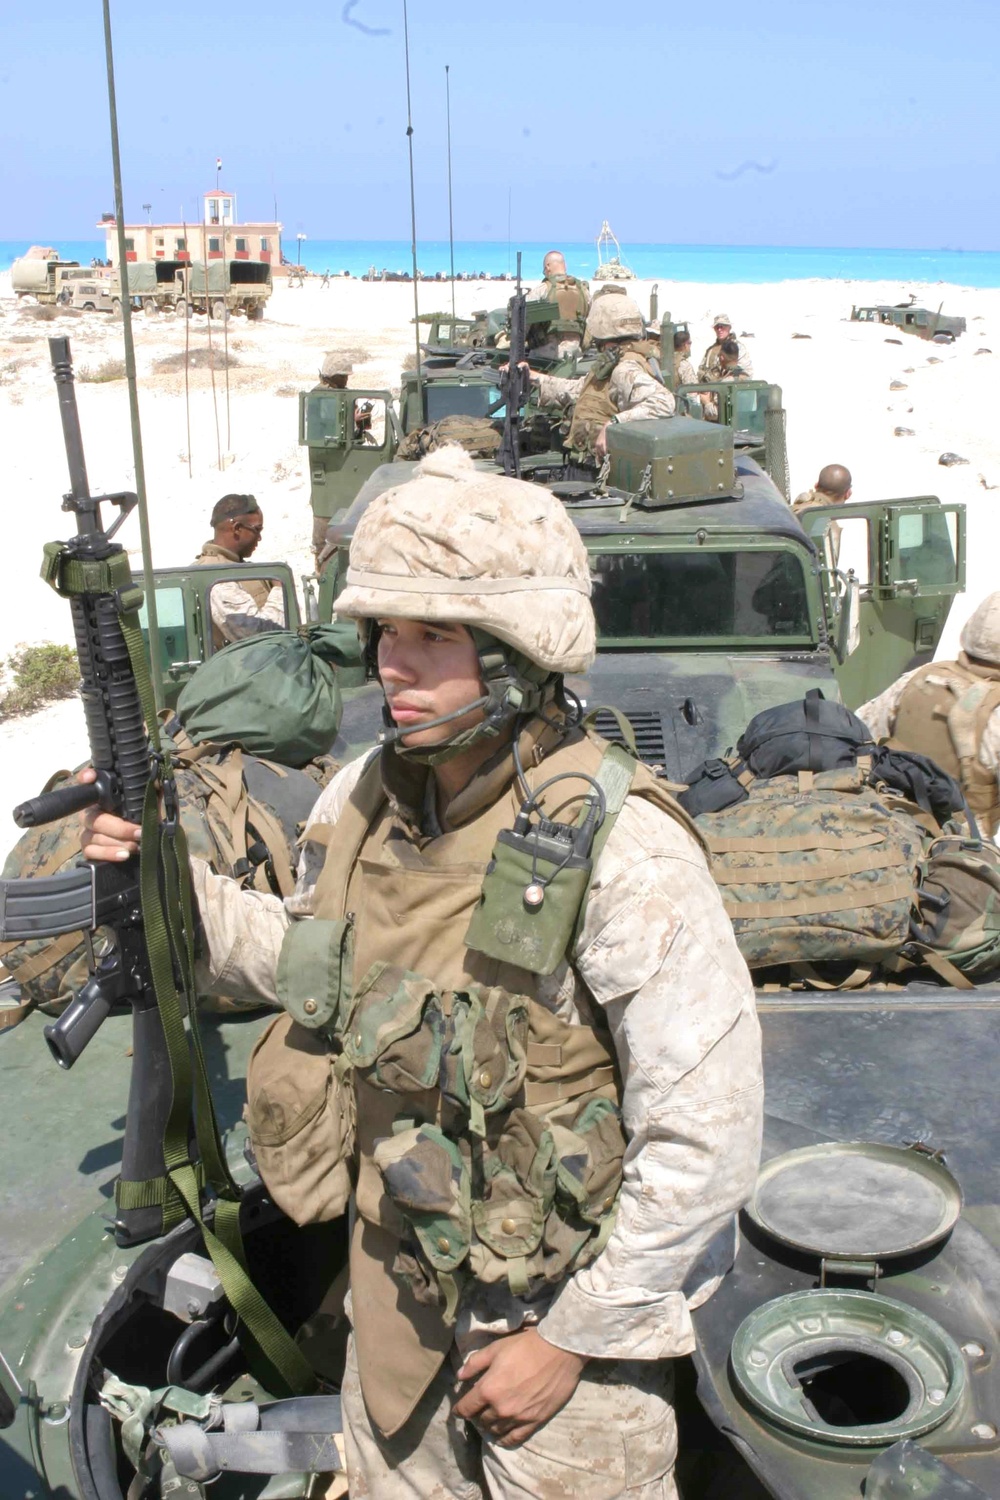 Lance Cpl. Jaime E. Saucedo Sits in the Turret